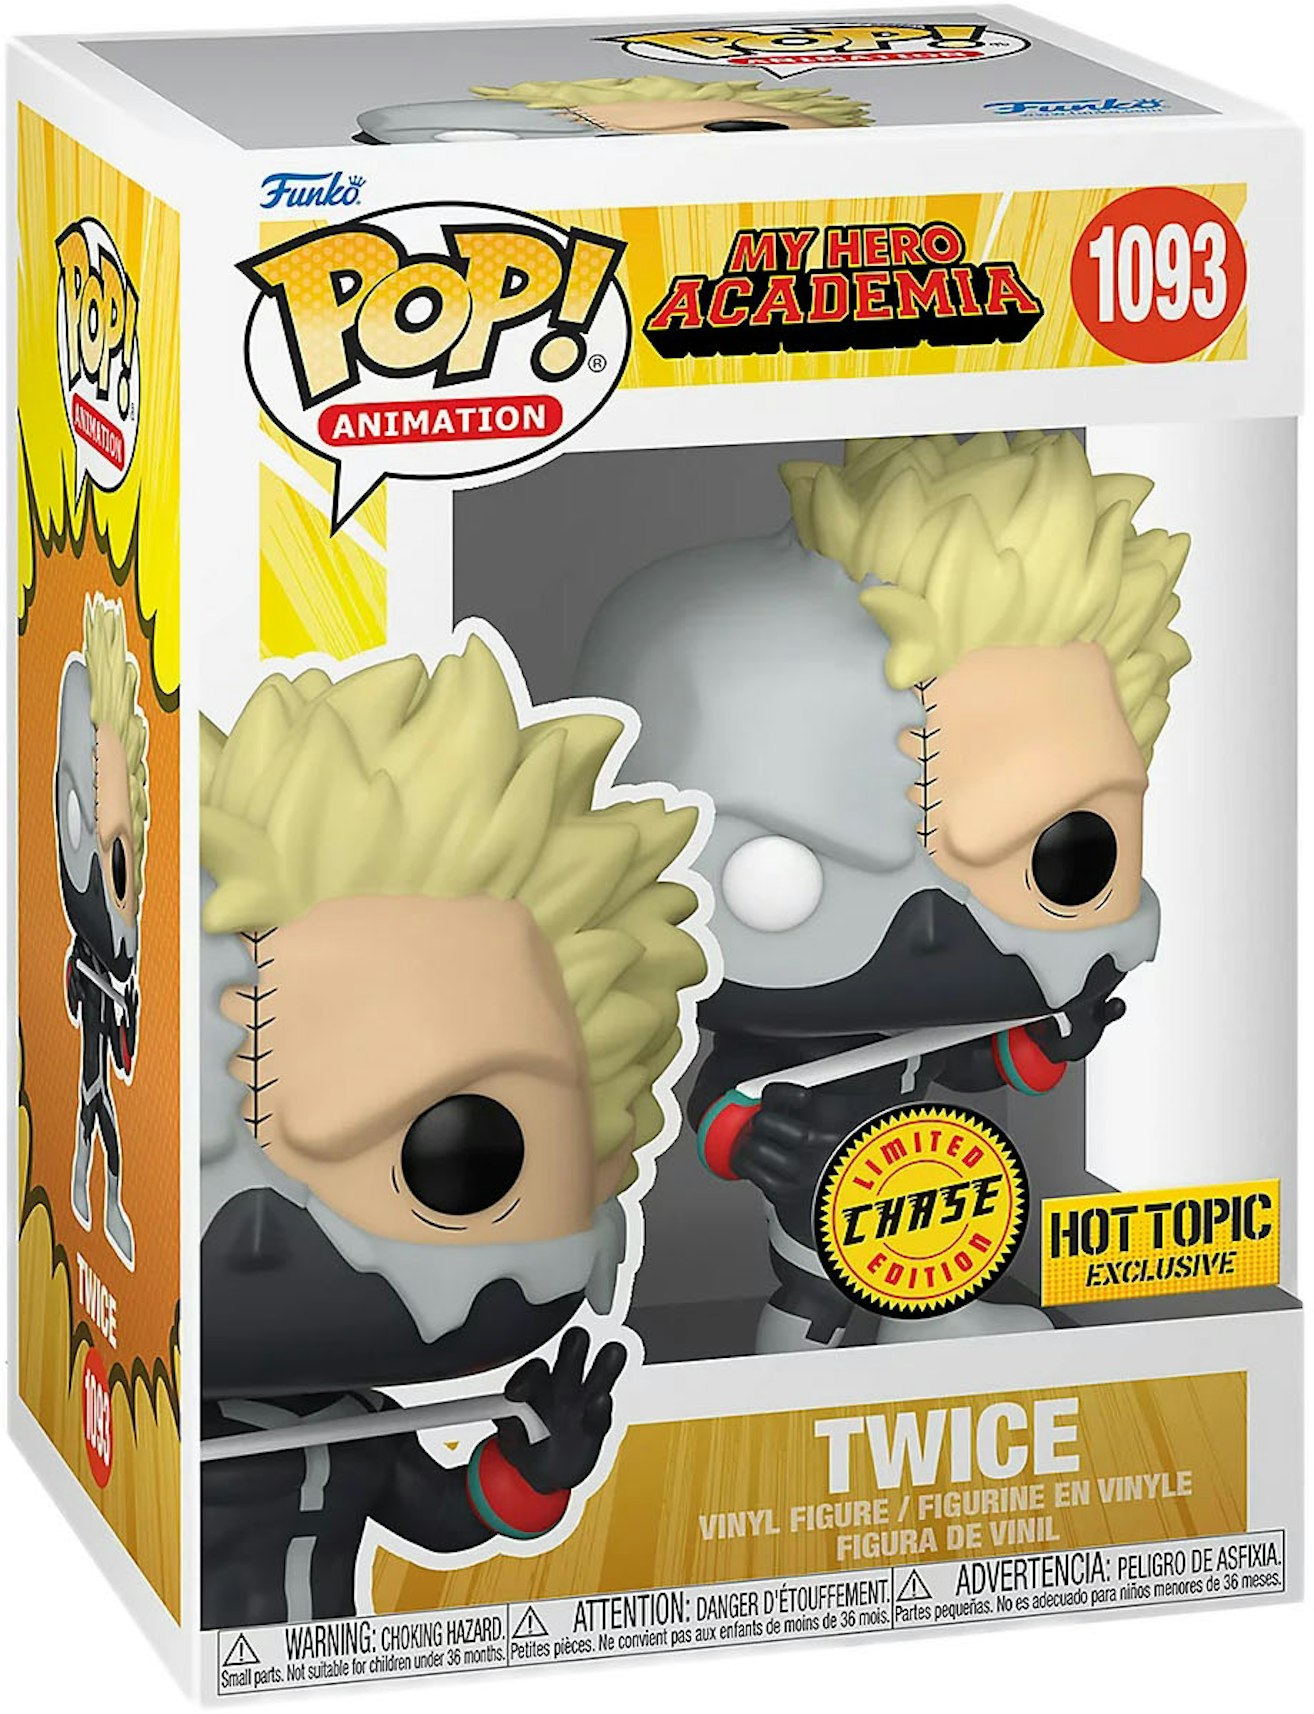 Funko Pop! Animation My Hero Academia Twice Hot Topic Chase Exclusive #1093 - SS22 - US